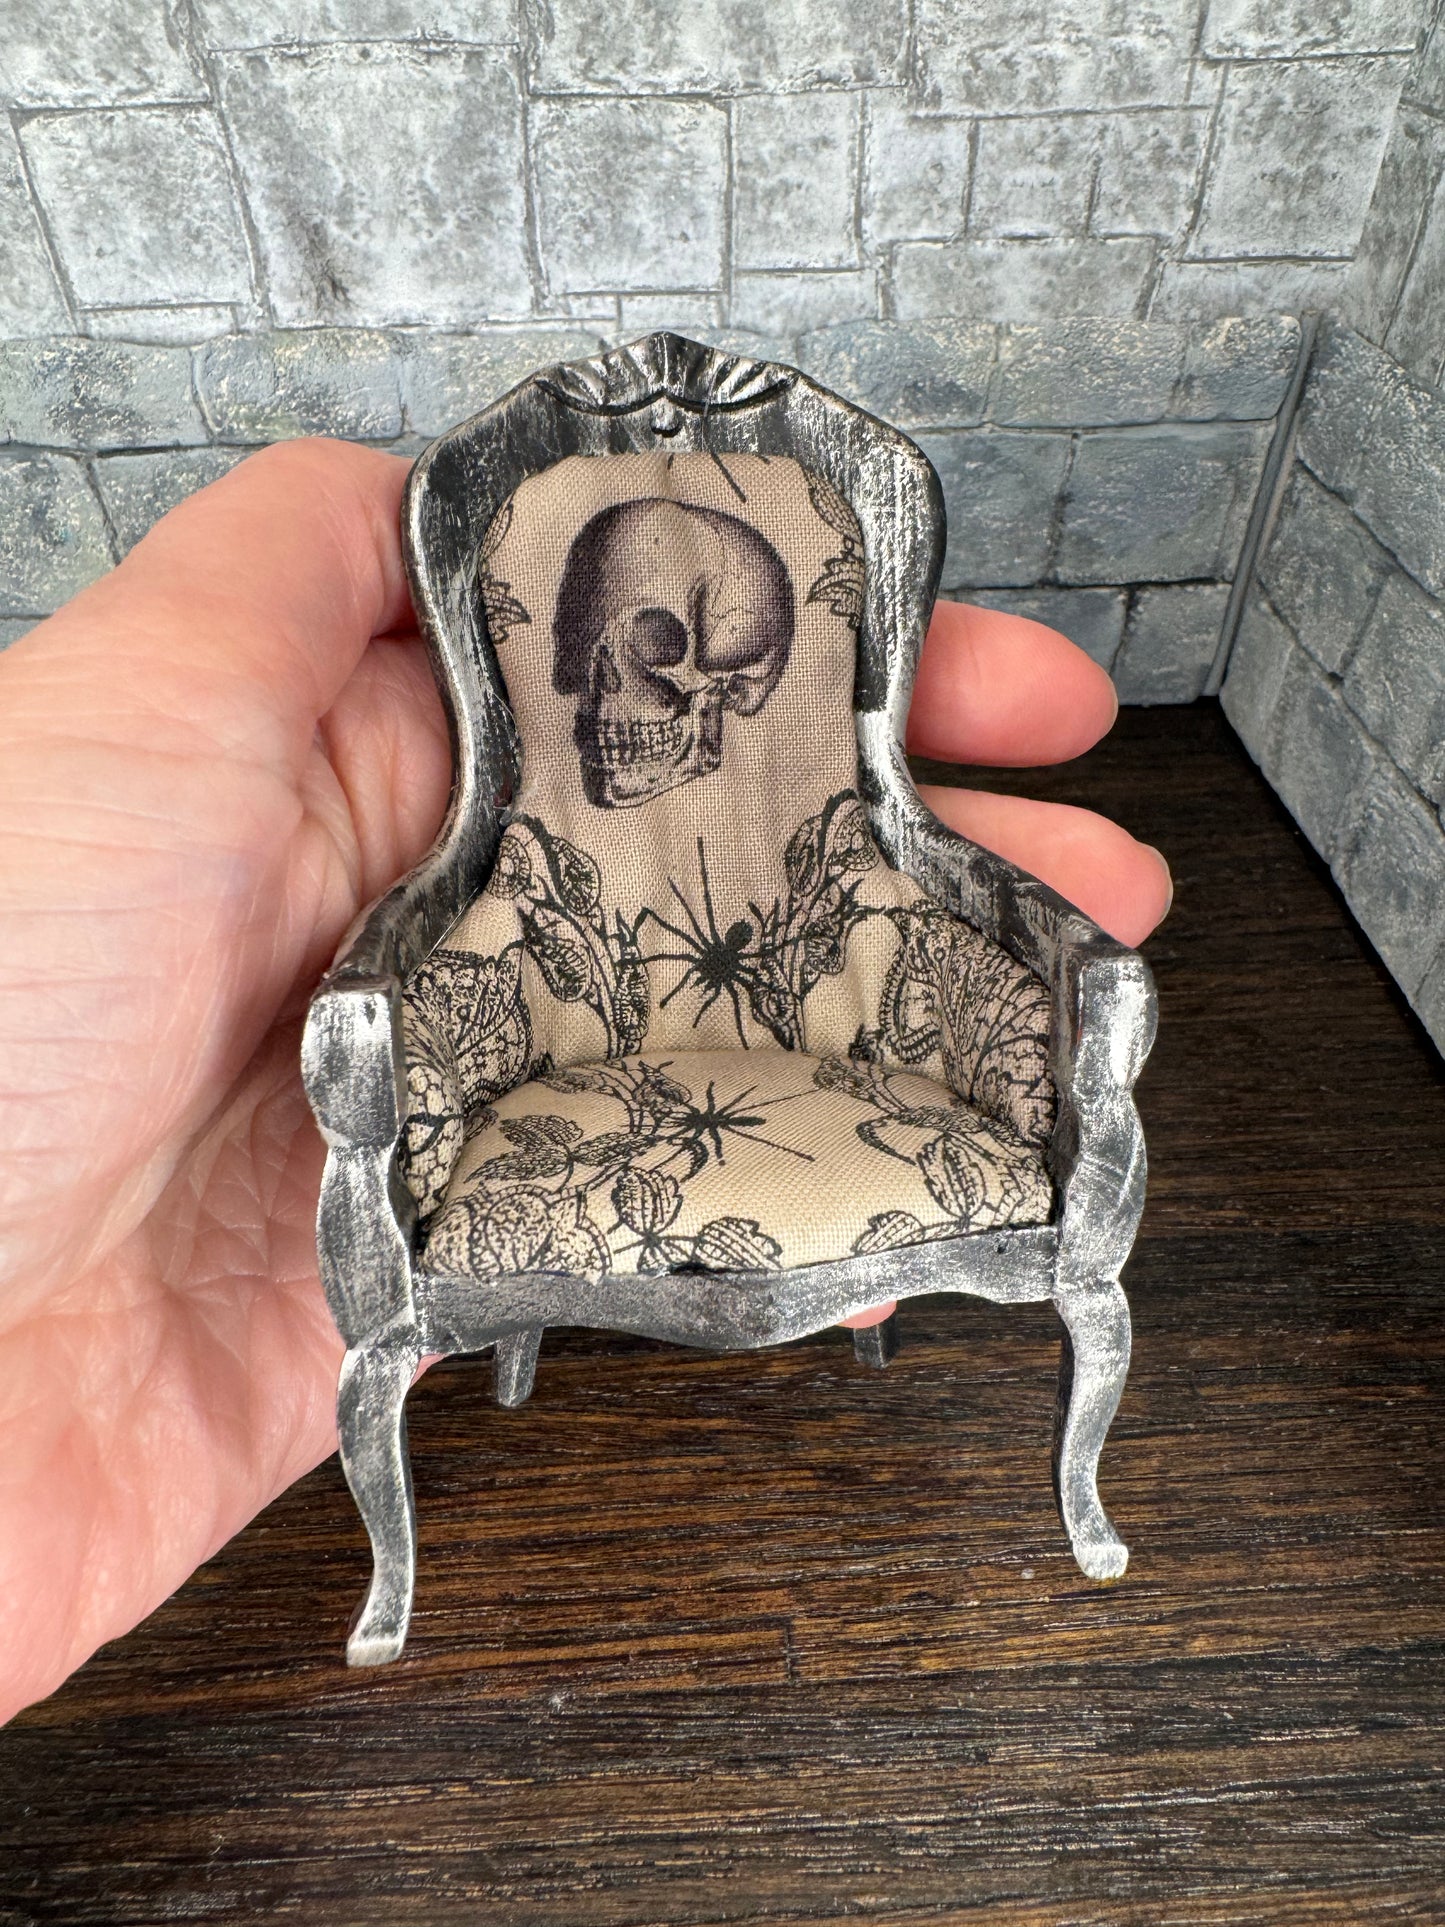 Gothic Spooky Skull and Spider Gentleman’s Chair - Dollhouse Miniature 1:12 Scale